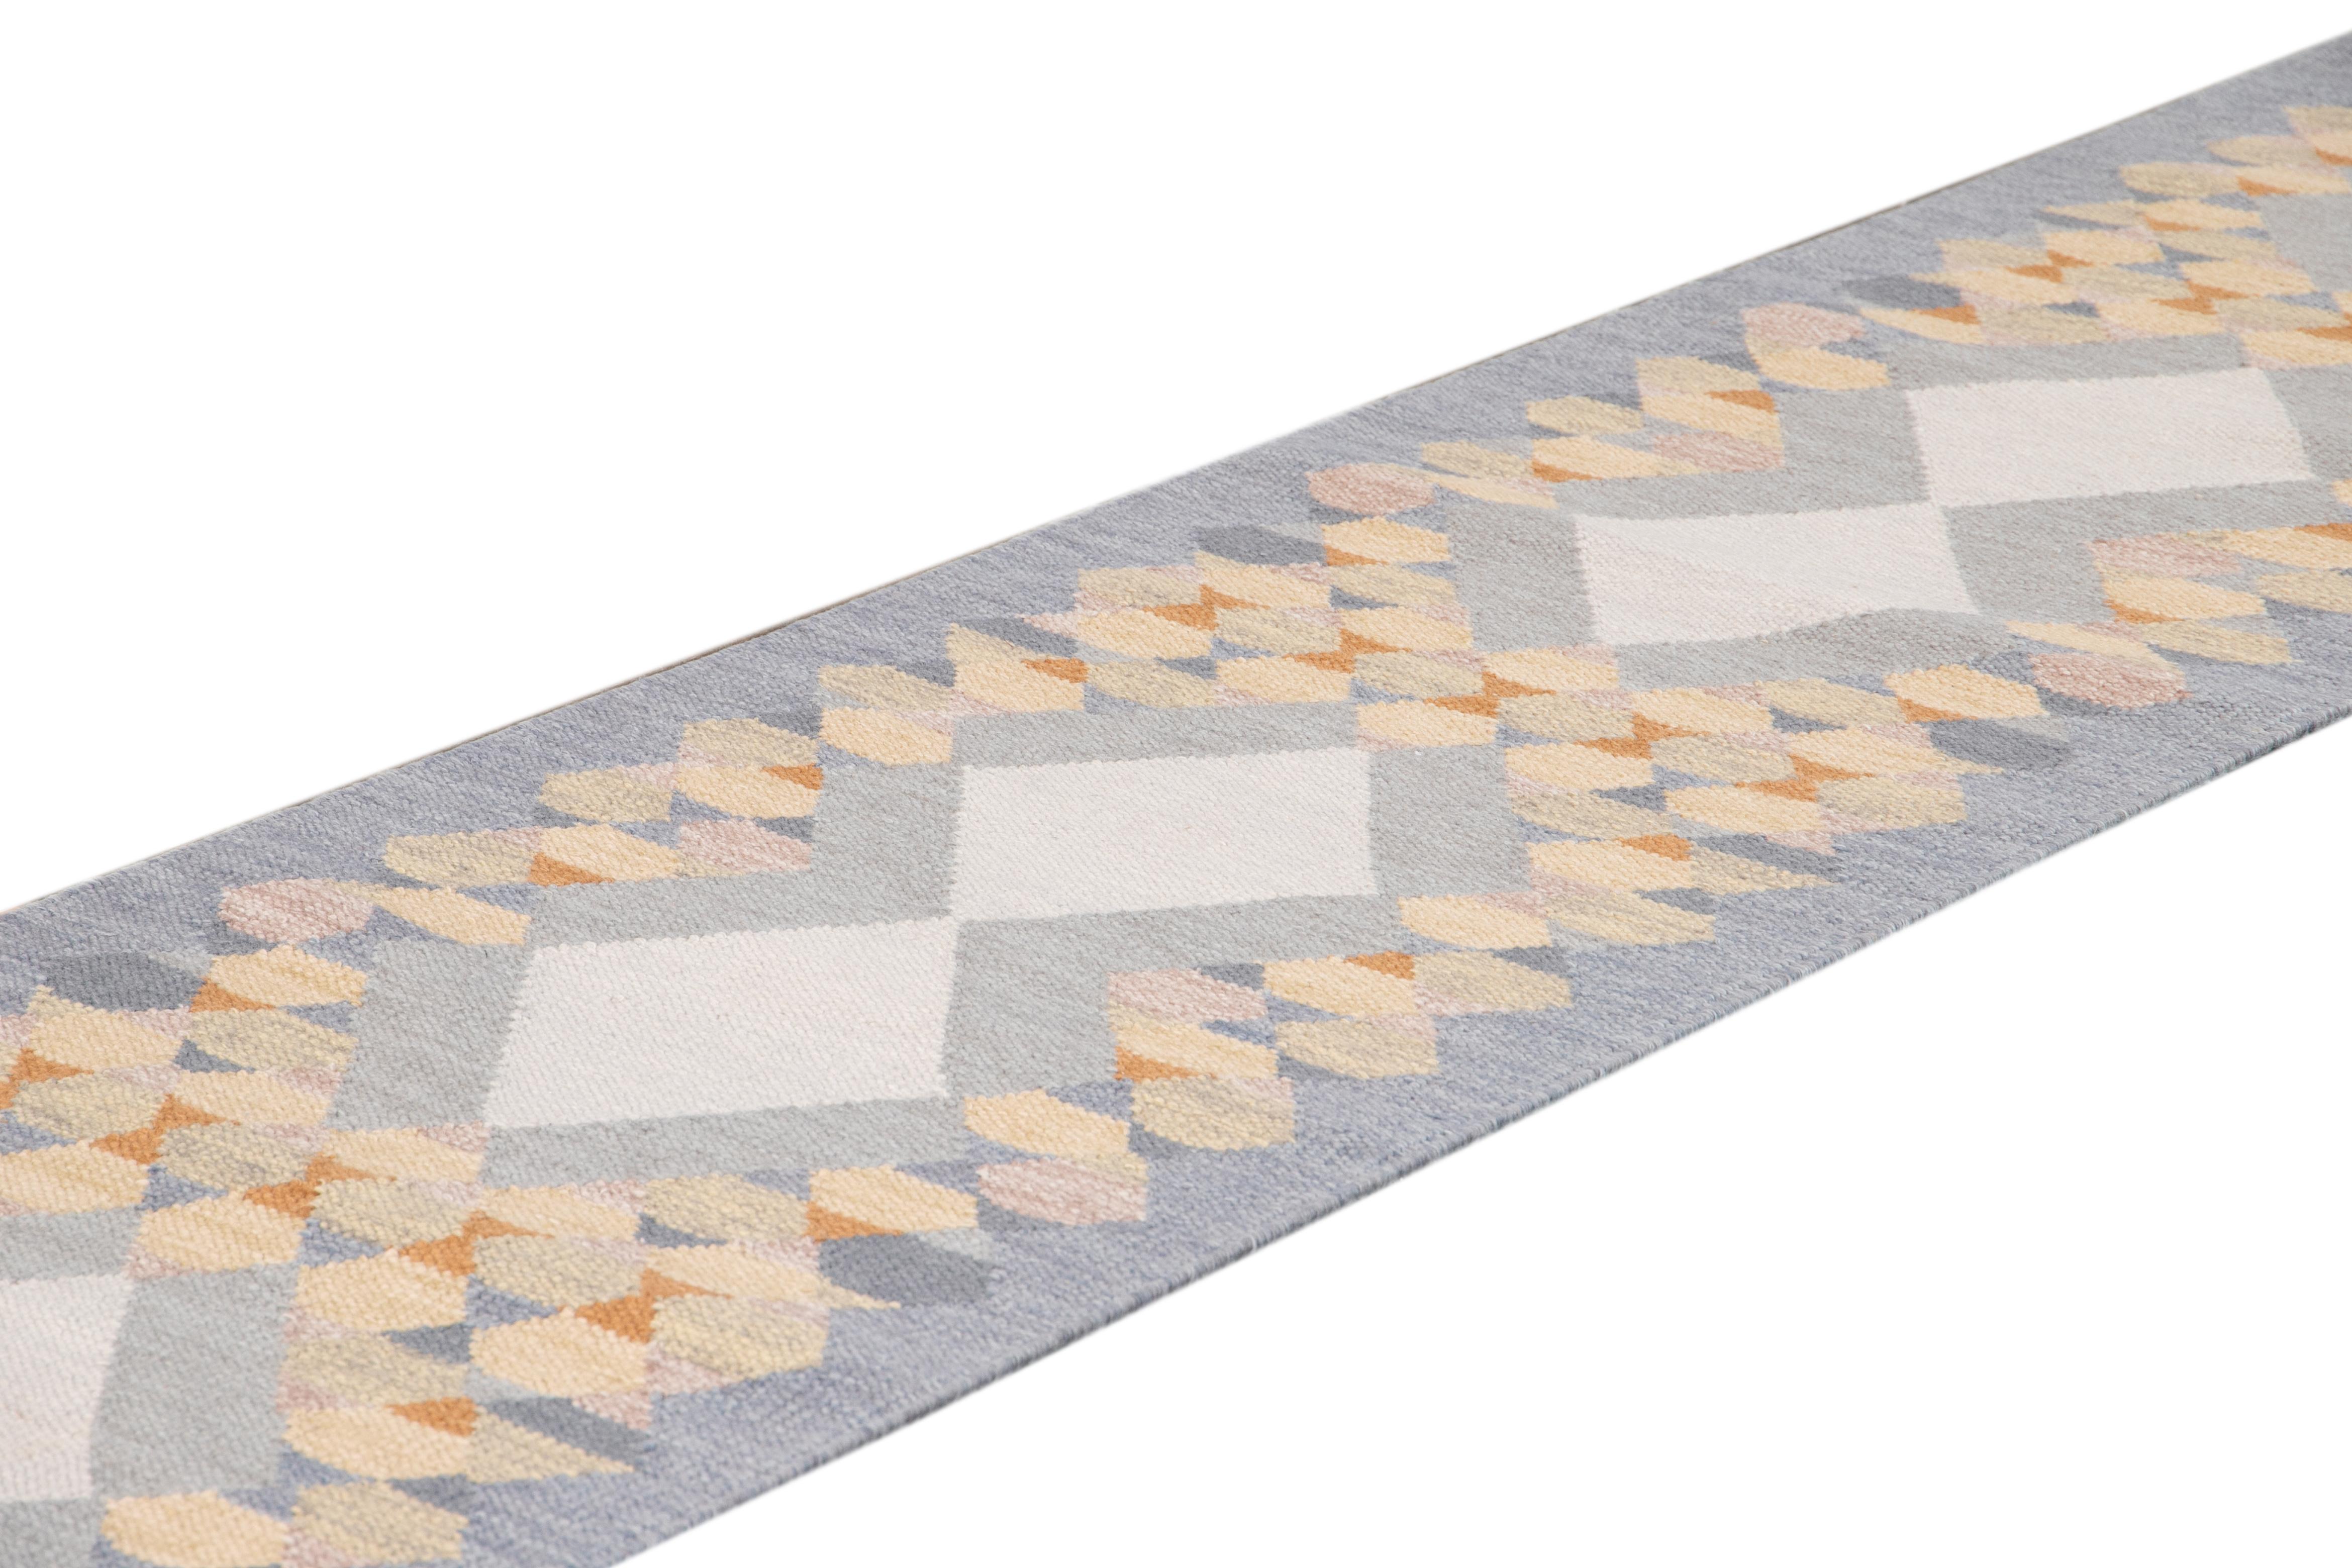 Beautiful contemporary Swedish style runner rug, hand knotted wool with a light blue field, tan and multicolor accents in an all-over Classic Scandinavian geometric design.
This rug measures 3' x 18'.
 